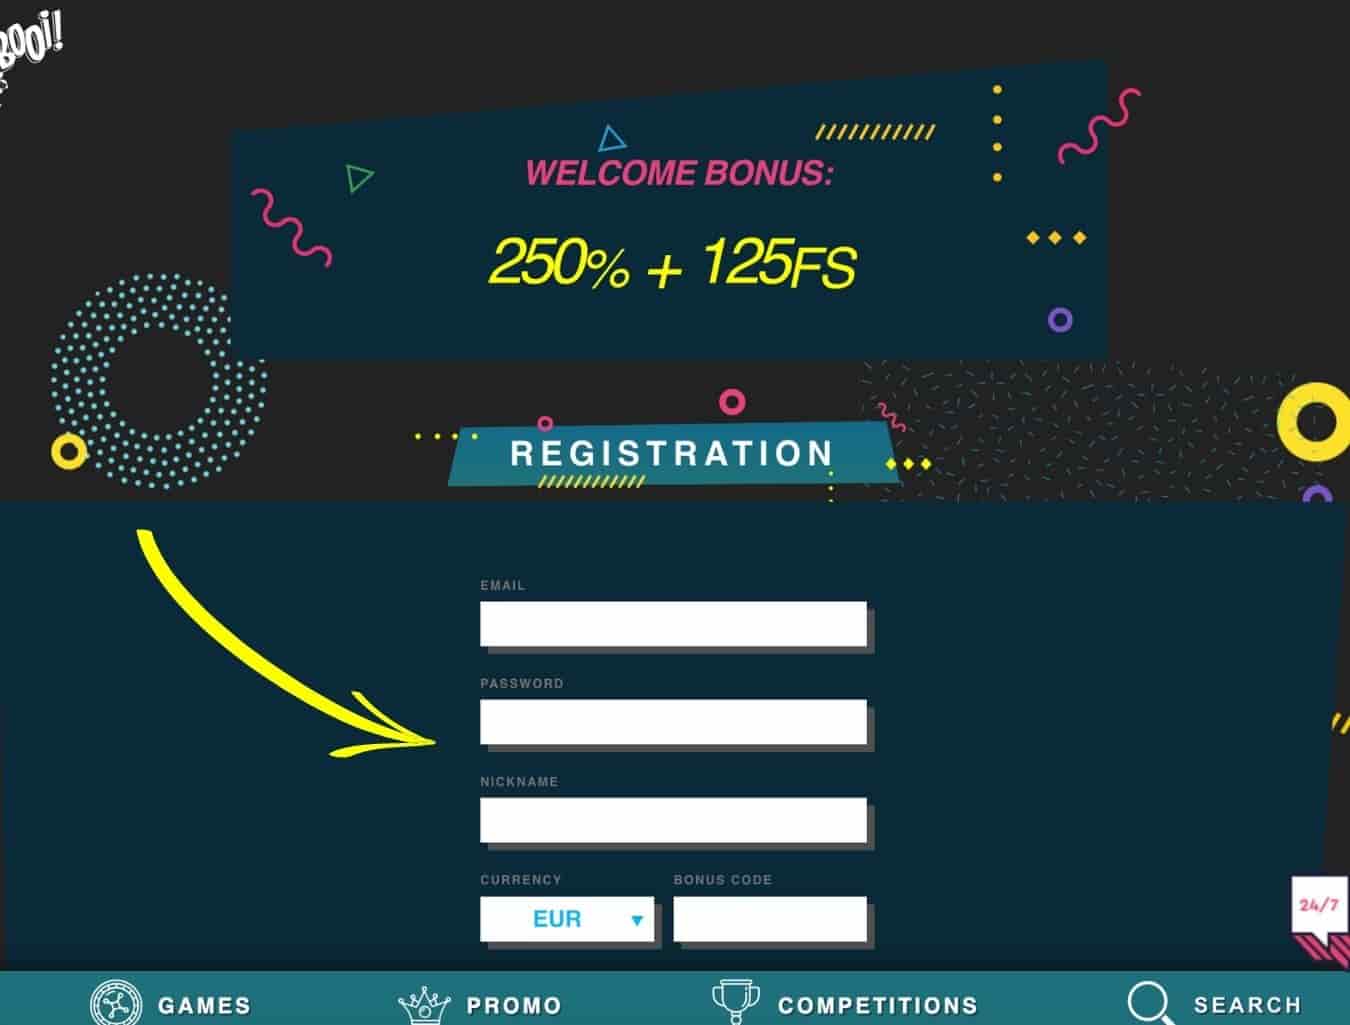 registration form step by step Booi Casino India